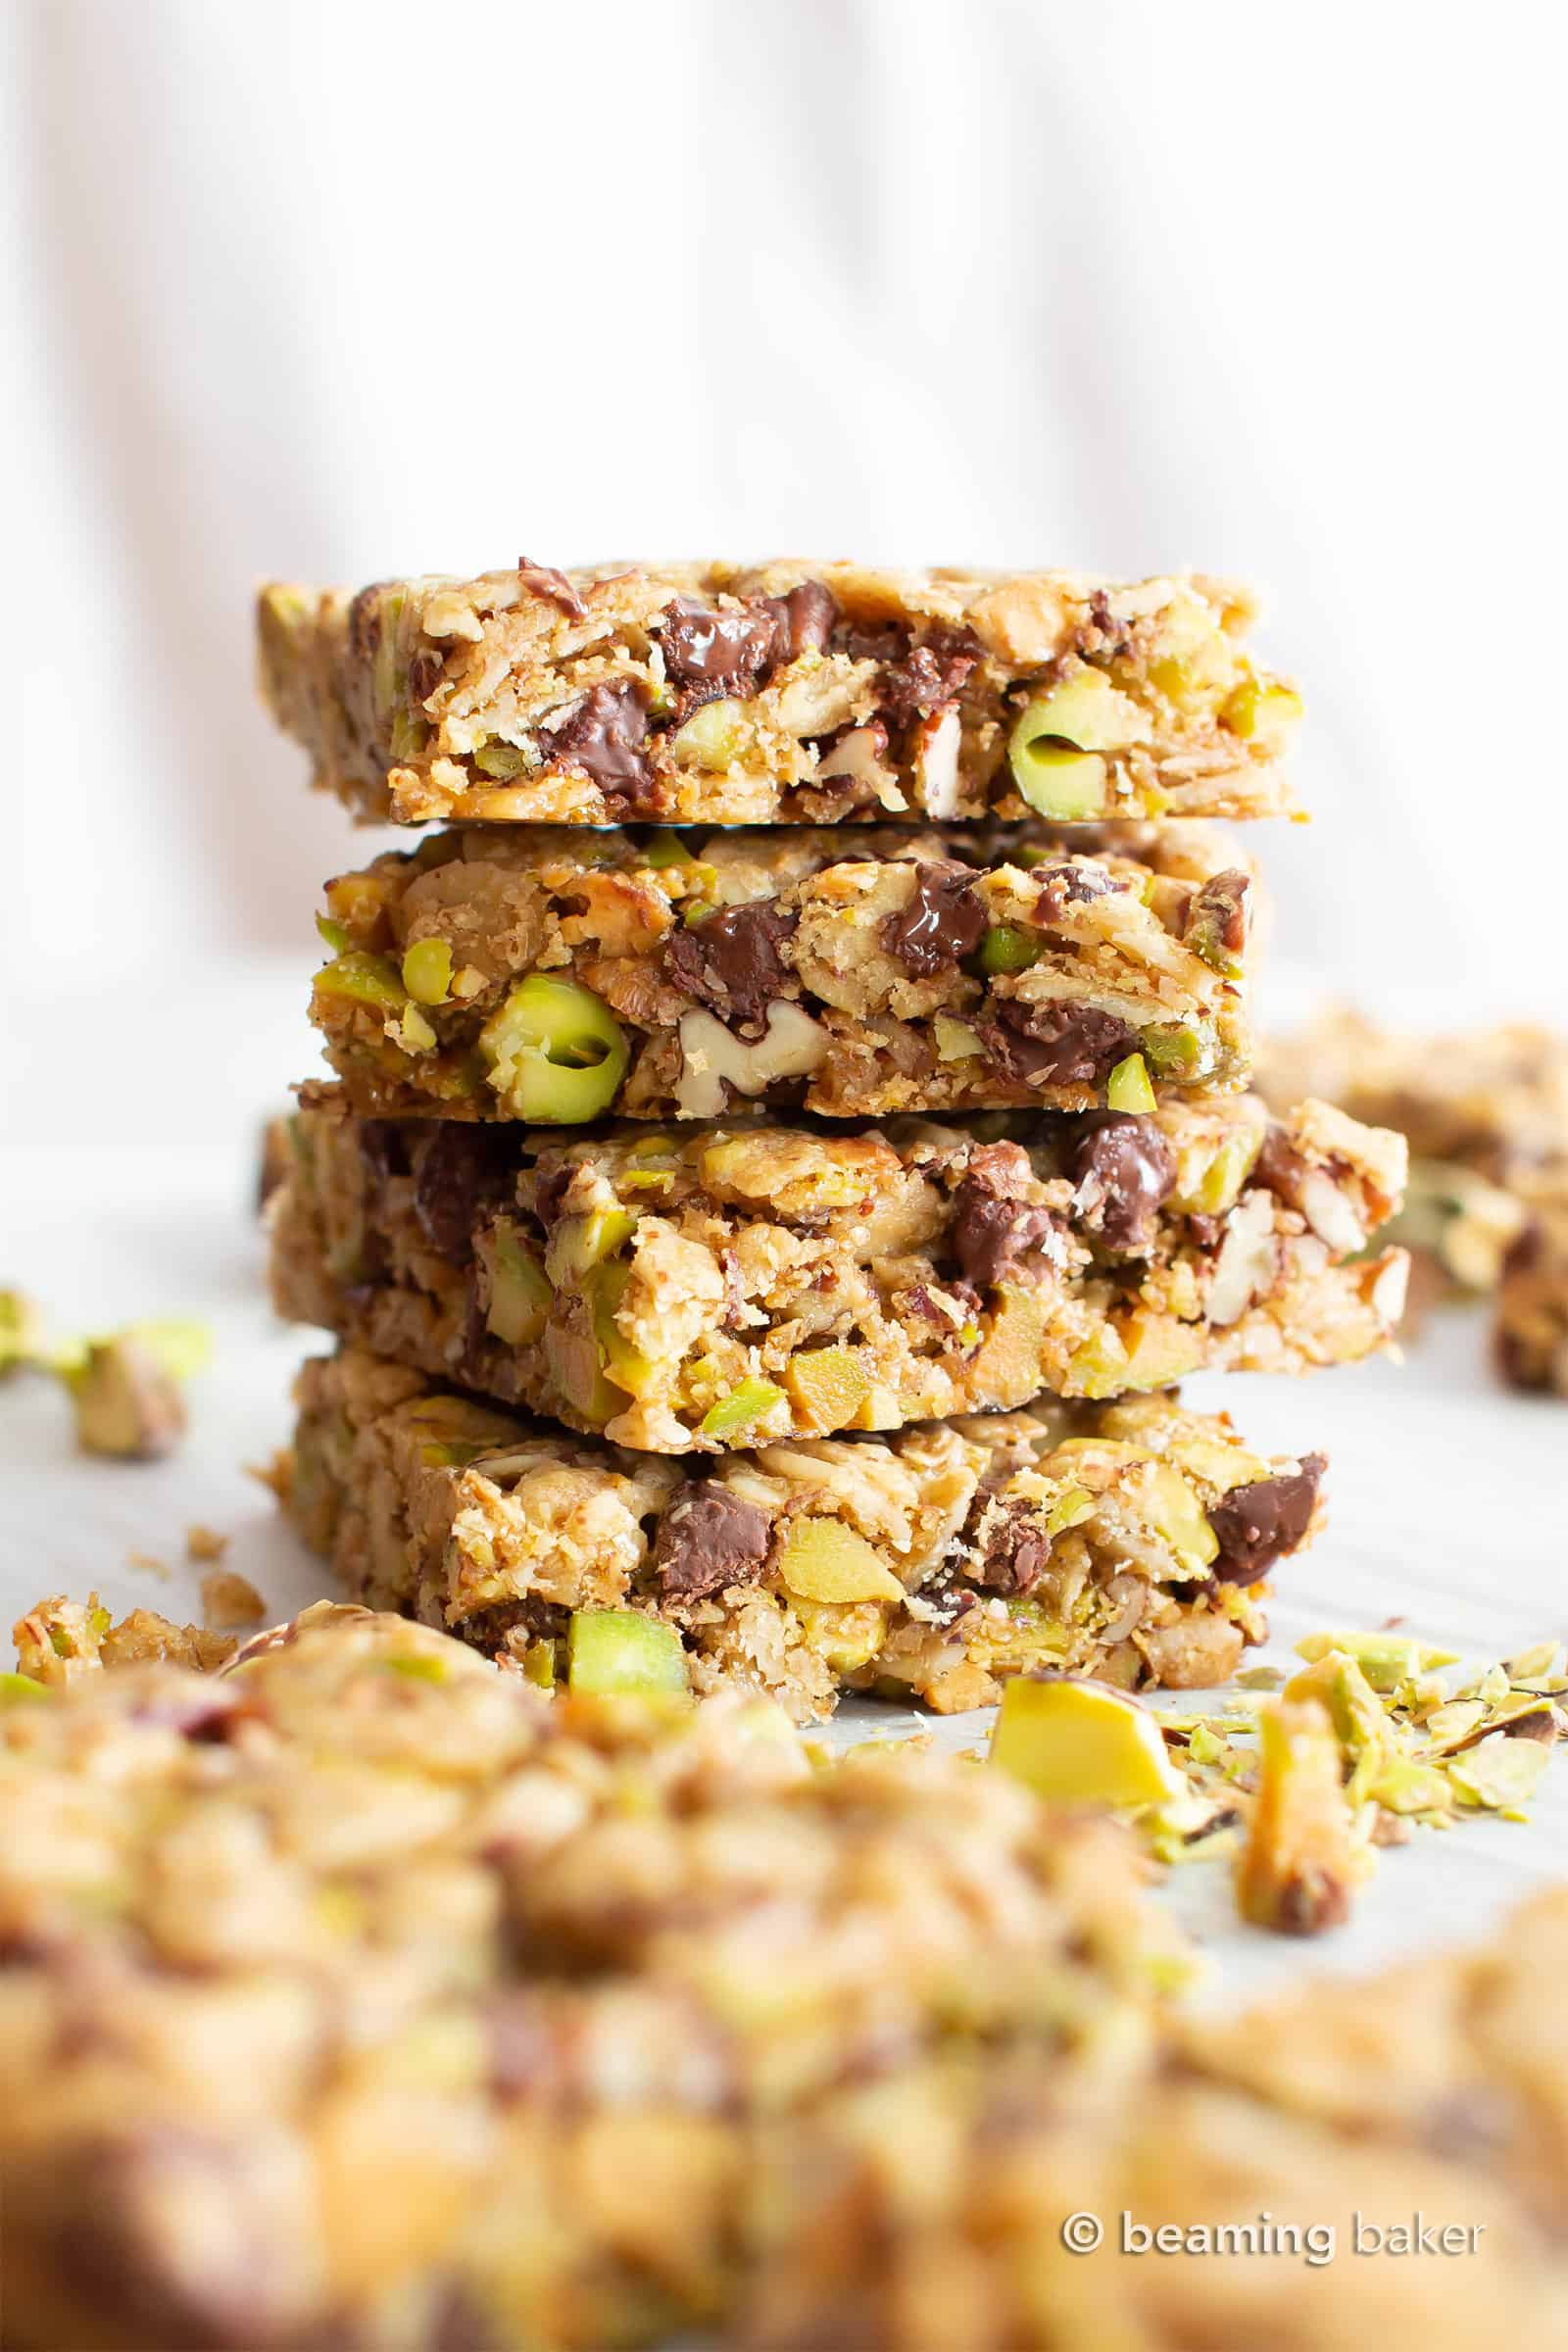 Chocolate Pistachio Healthy Vegan Snack Bars (GF): soft & chewy Gluten Free Vegan snack bars packed with chocolate & pistachios! The perfect nutty snack—easy to make, simple ingredients for the BEST vegan snack bars! Dairy-Free, Refined Sugar-Free. #Snacks #Vegan #GlutenFree #HealthySnacks | Recipe at BeamingBaker.com